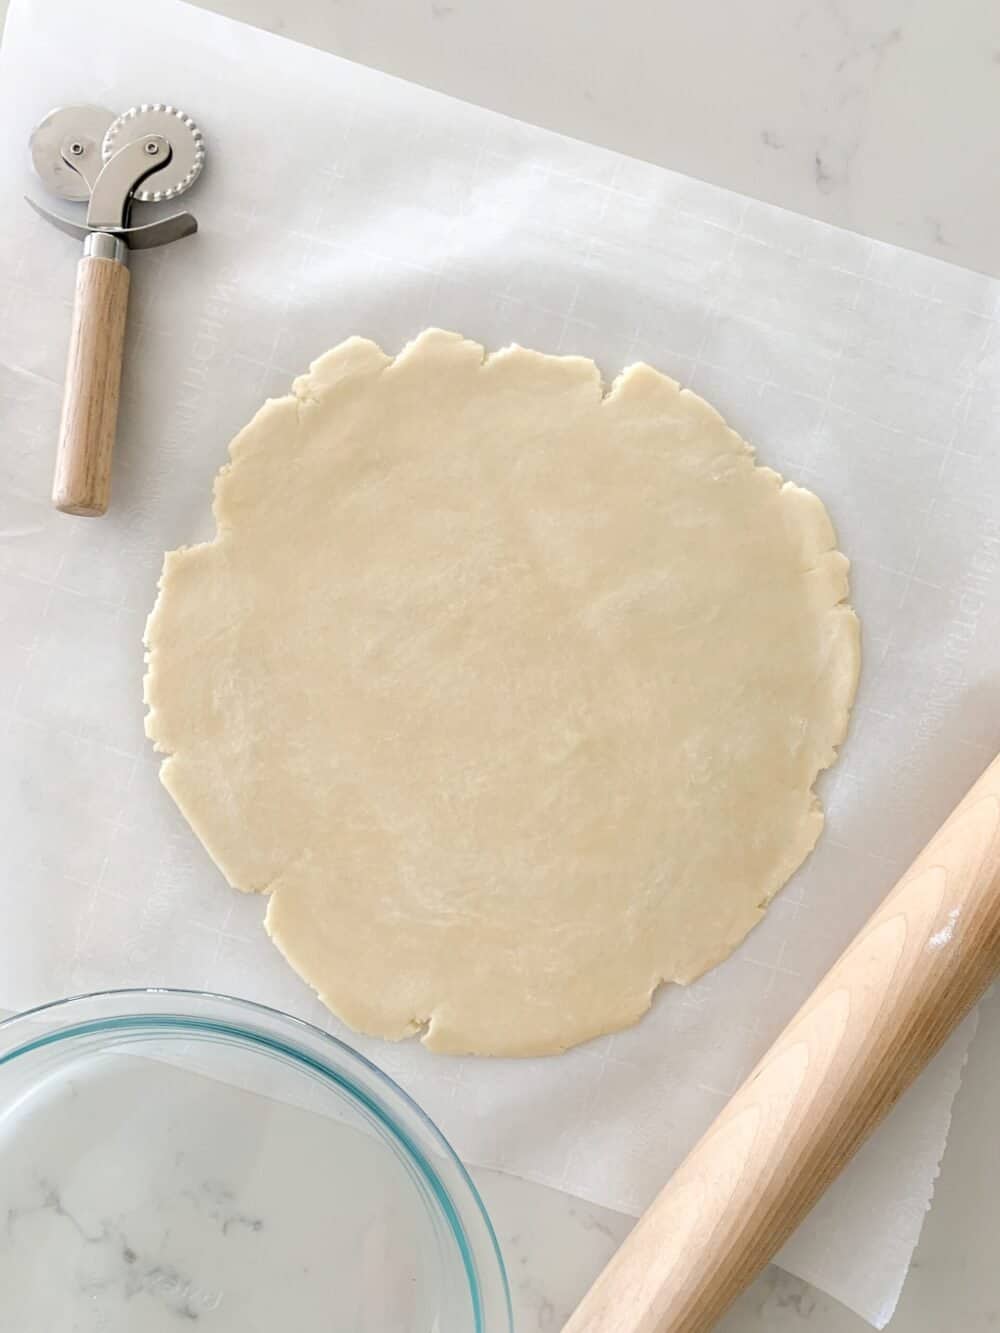 homemade pie crust rolled out